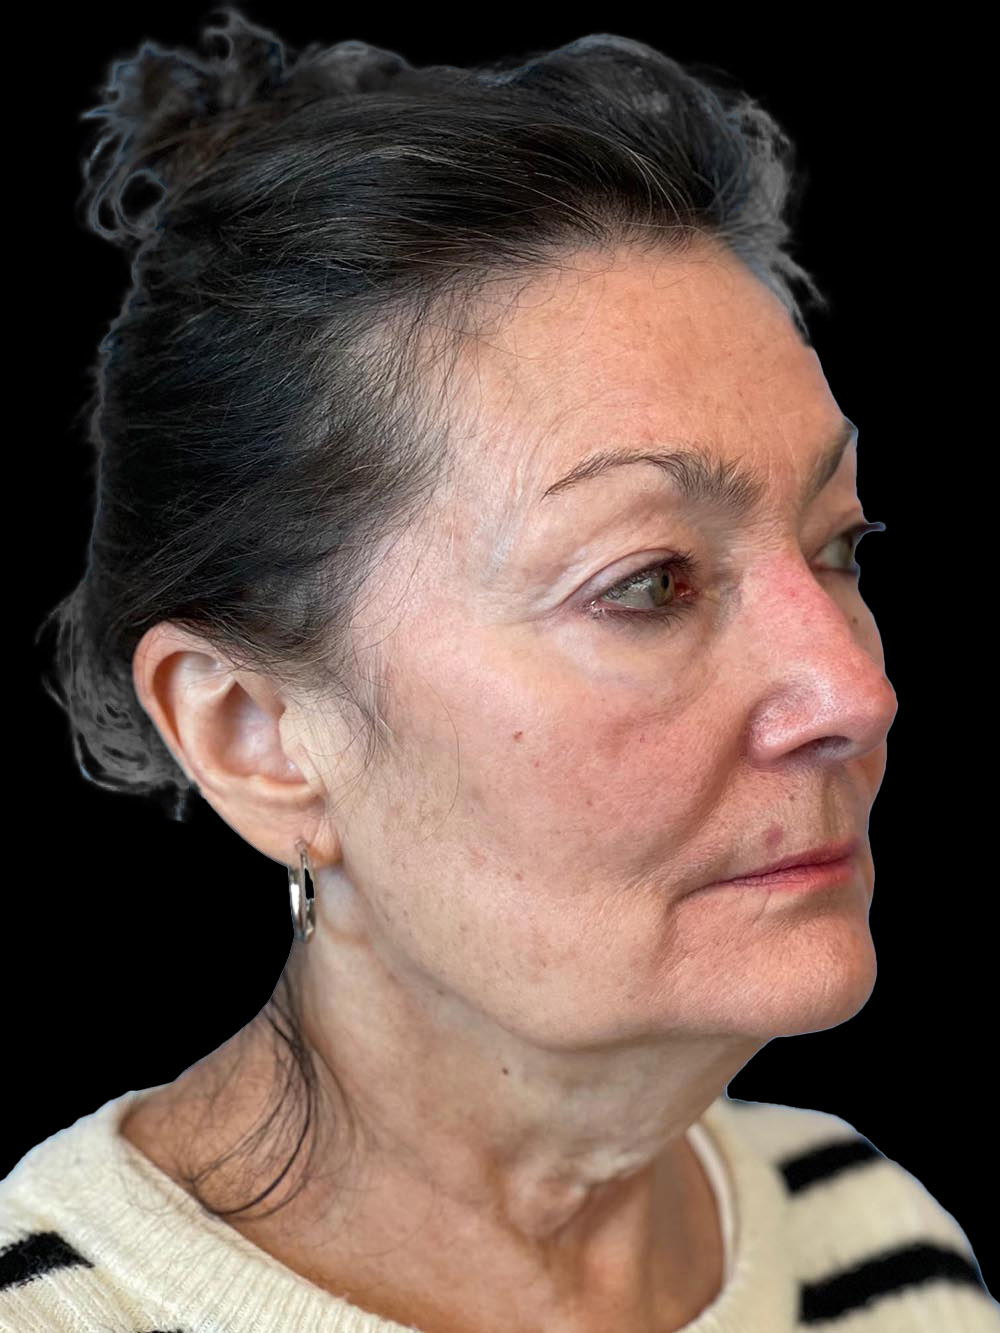 Photo of the patient’s face before the Facelift surgery. Patient 5 - Set 4